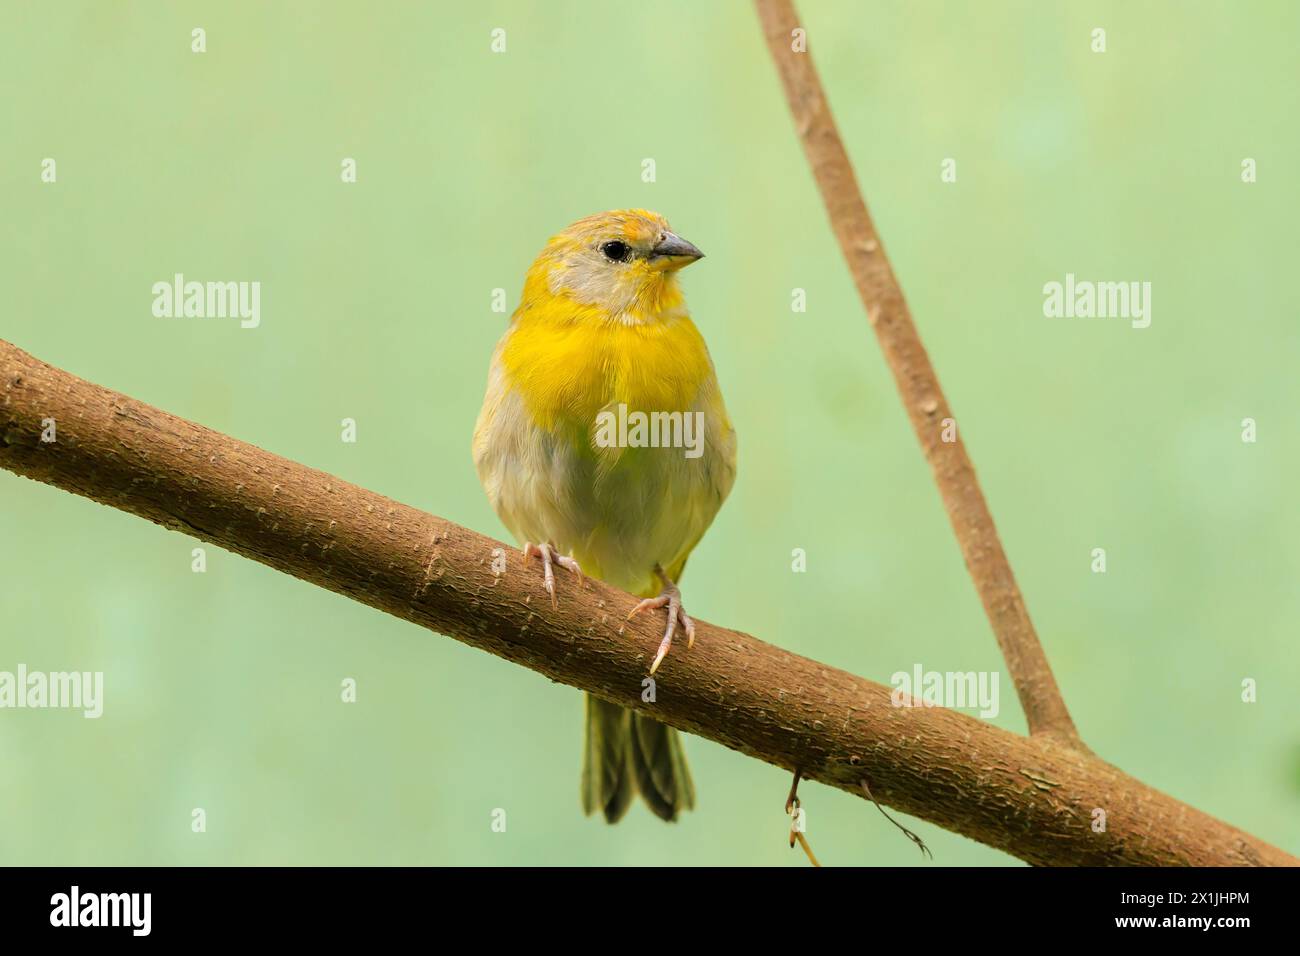 Closeup of a saffron finch, Sicalis flaveola, perched in a forest. Stock Photo